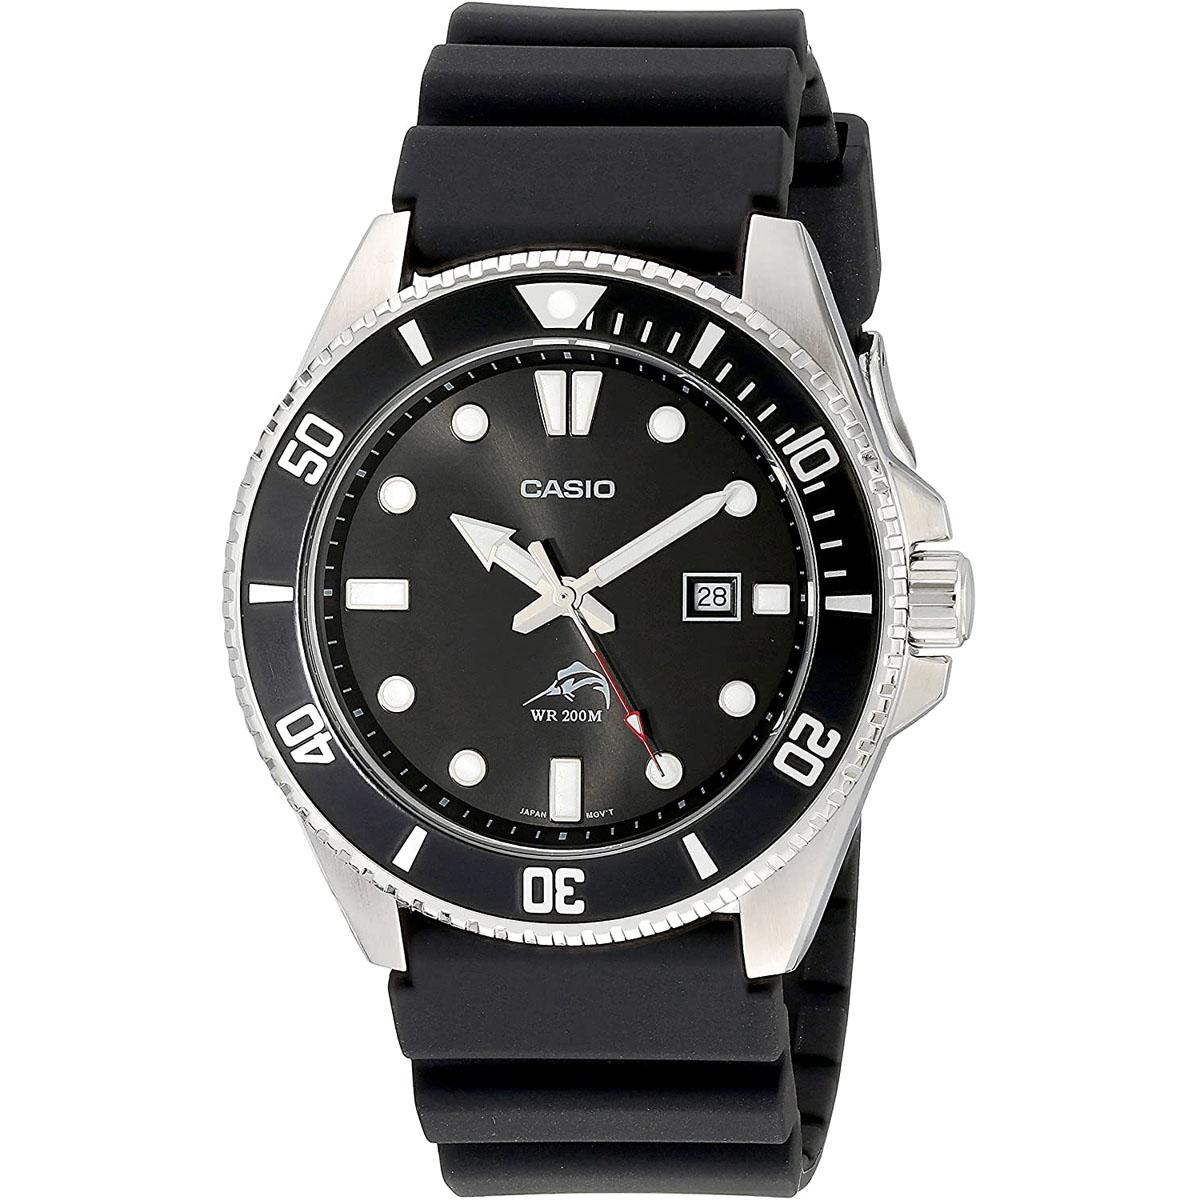 Casio Mens Black Dive-Style Sport Watch for $40 Shipped